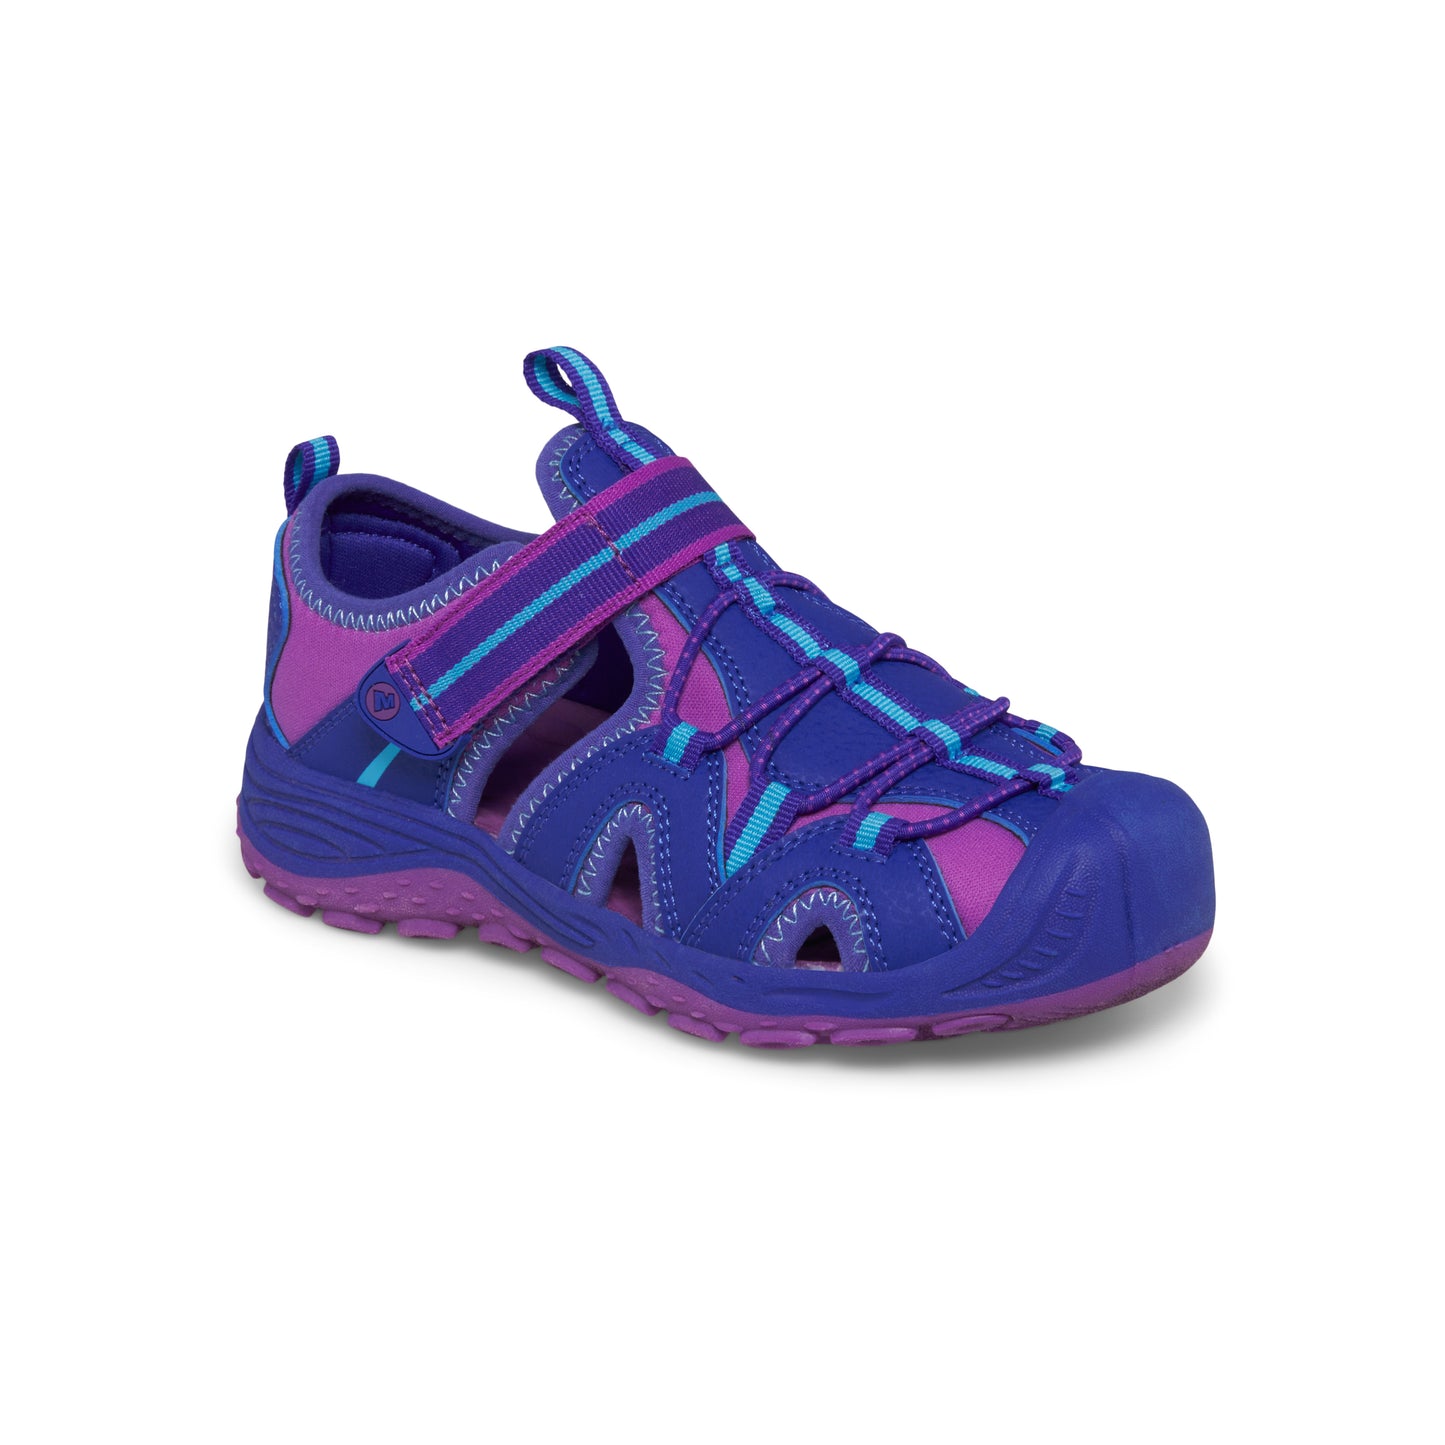 Hydro 2.0 Sandal Blue/Berry/Turquoise